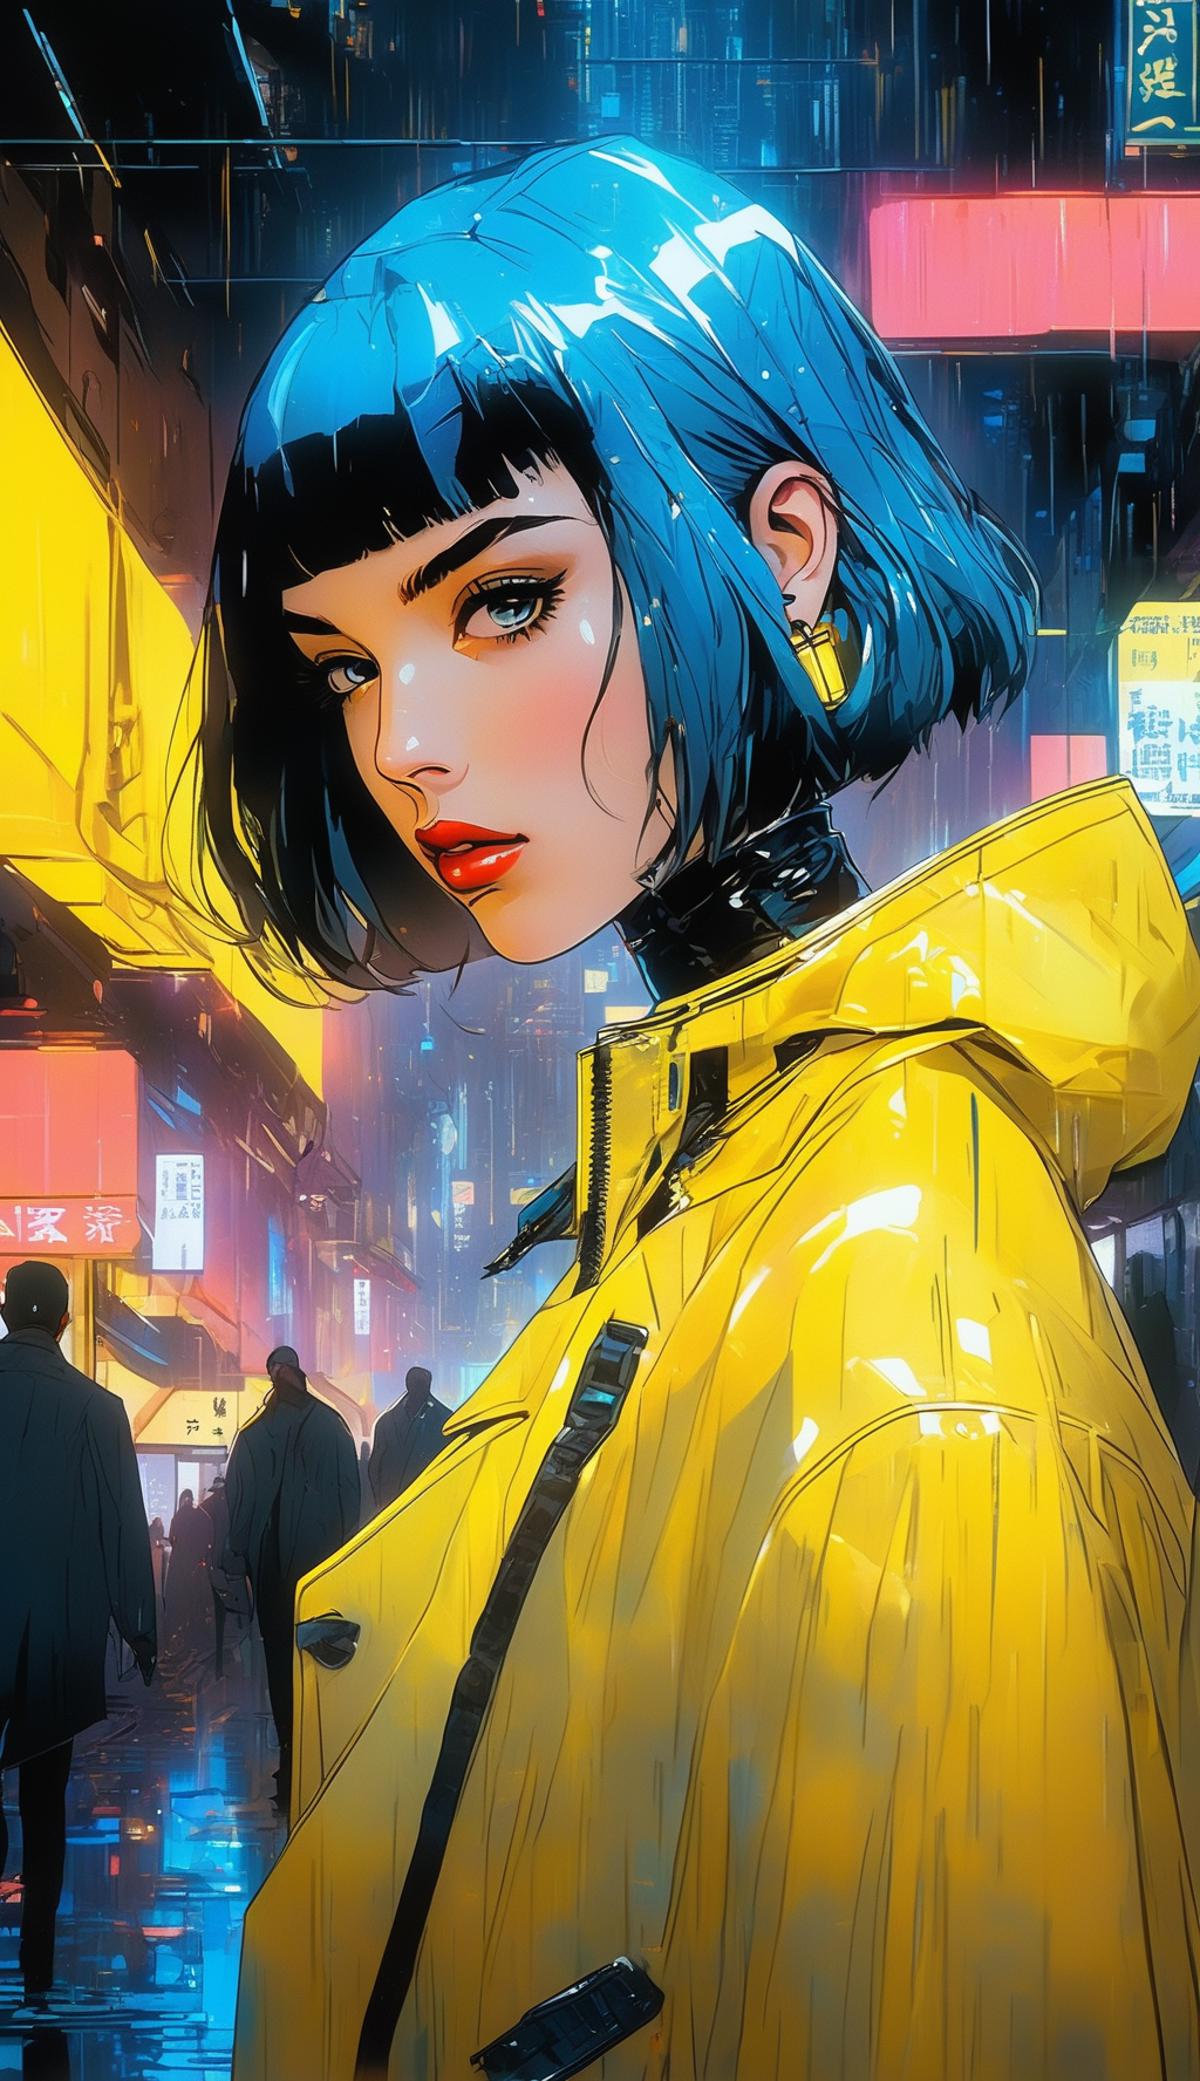 A young woman in a yellow raincoat stands in the rain, looking down.